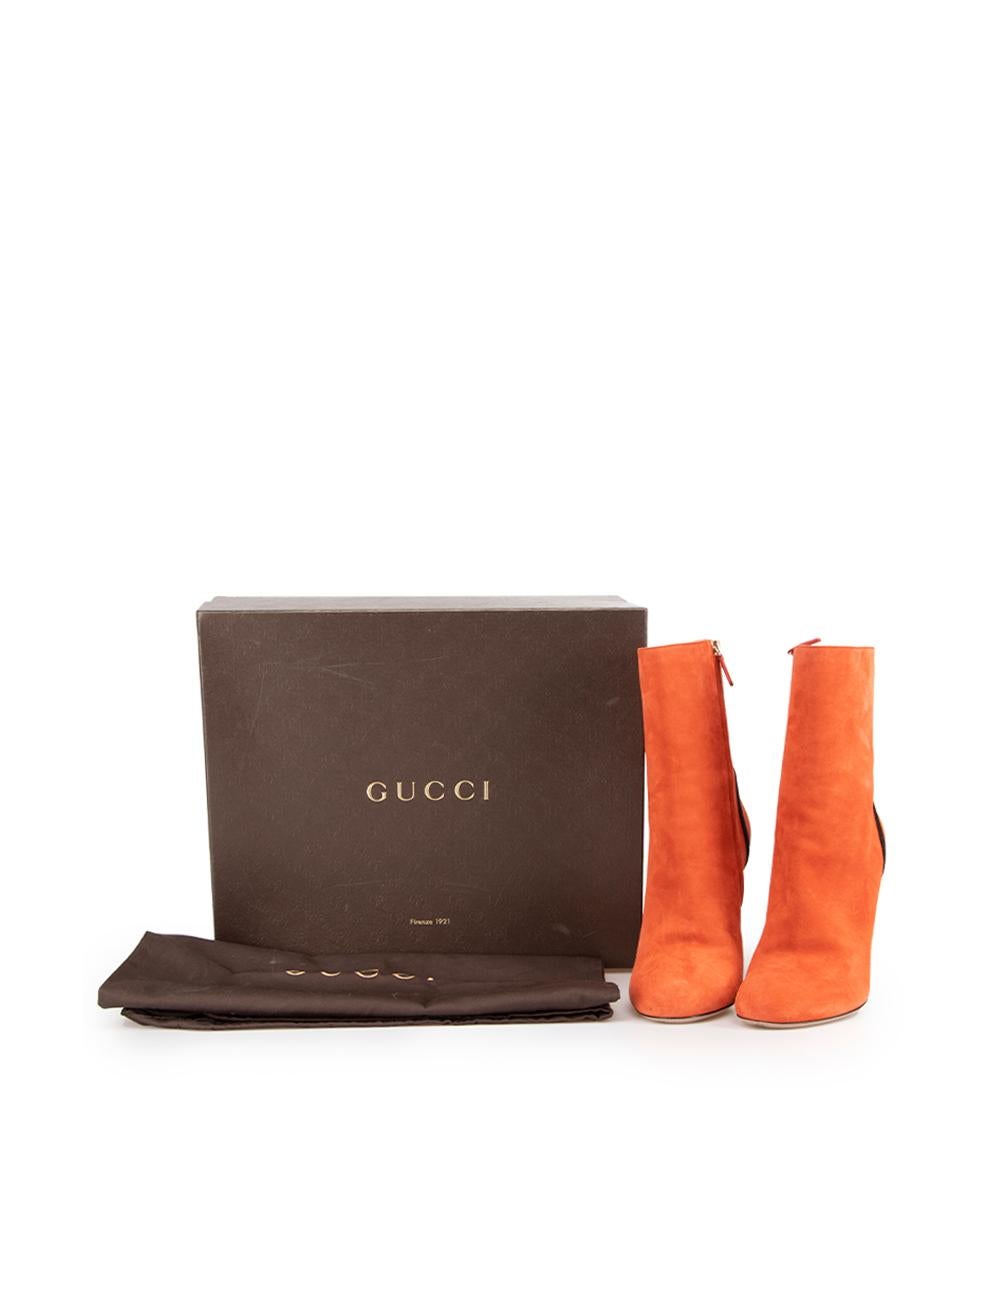 Gucci Women's Orange Suede Wedge Ankle Boots 2